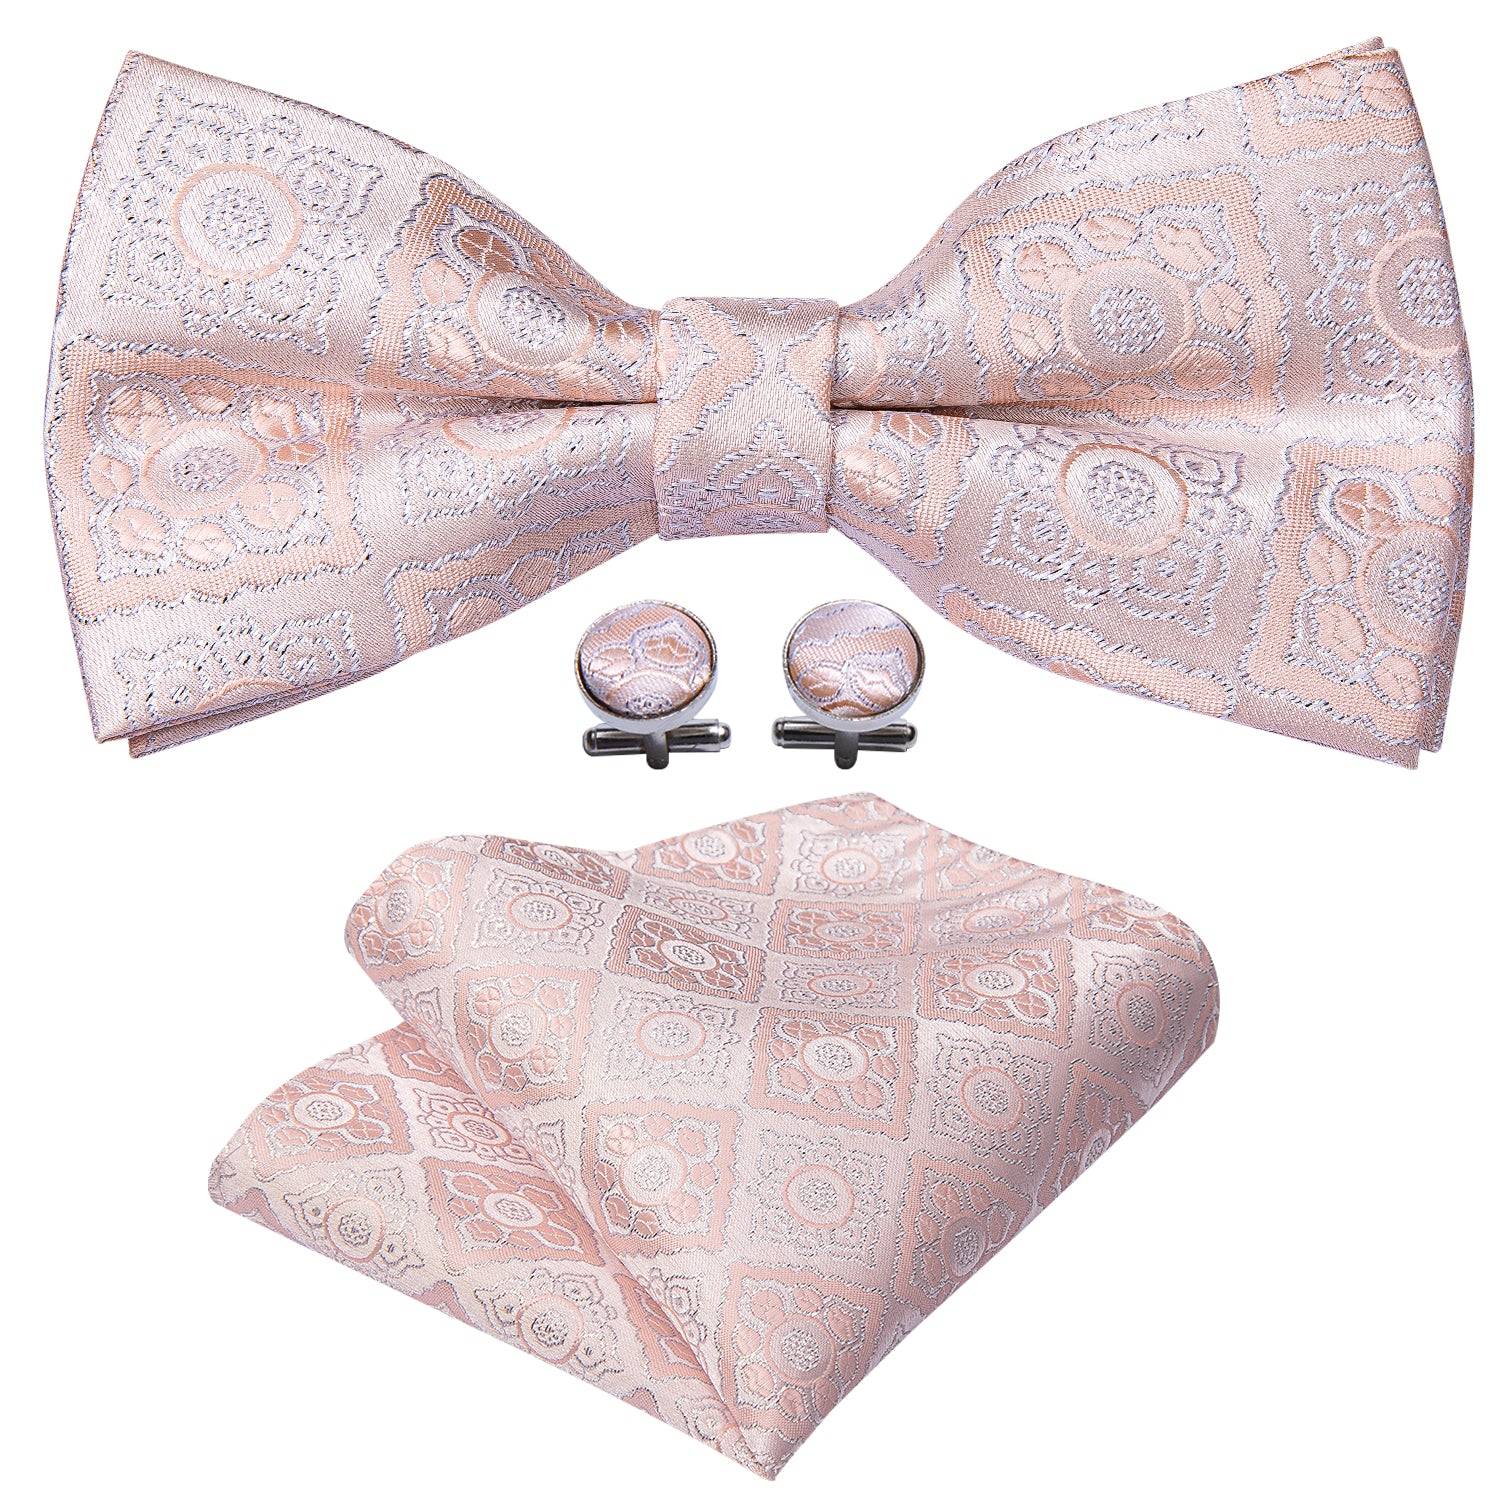 Barry.wang Pink Tie Paisley Pre-tied Bow Tie Ring Hanky Cufflinks Set